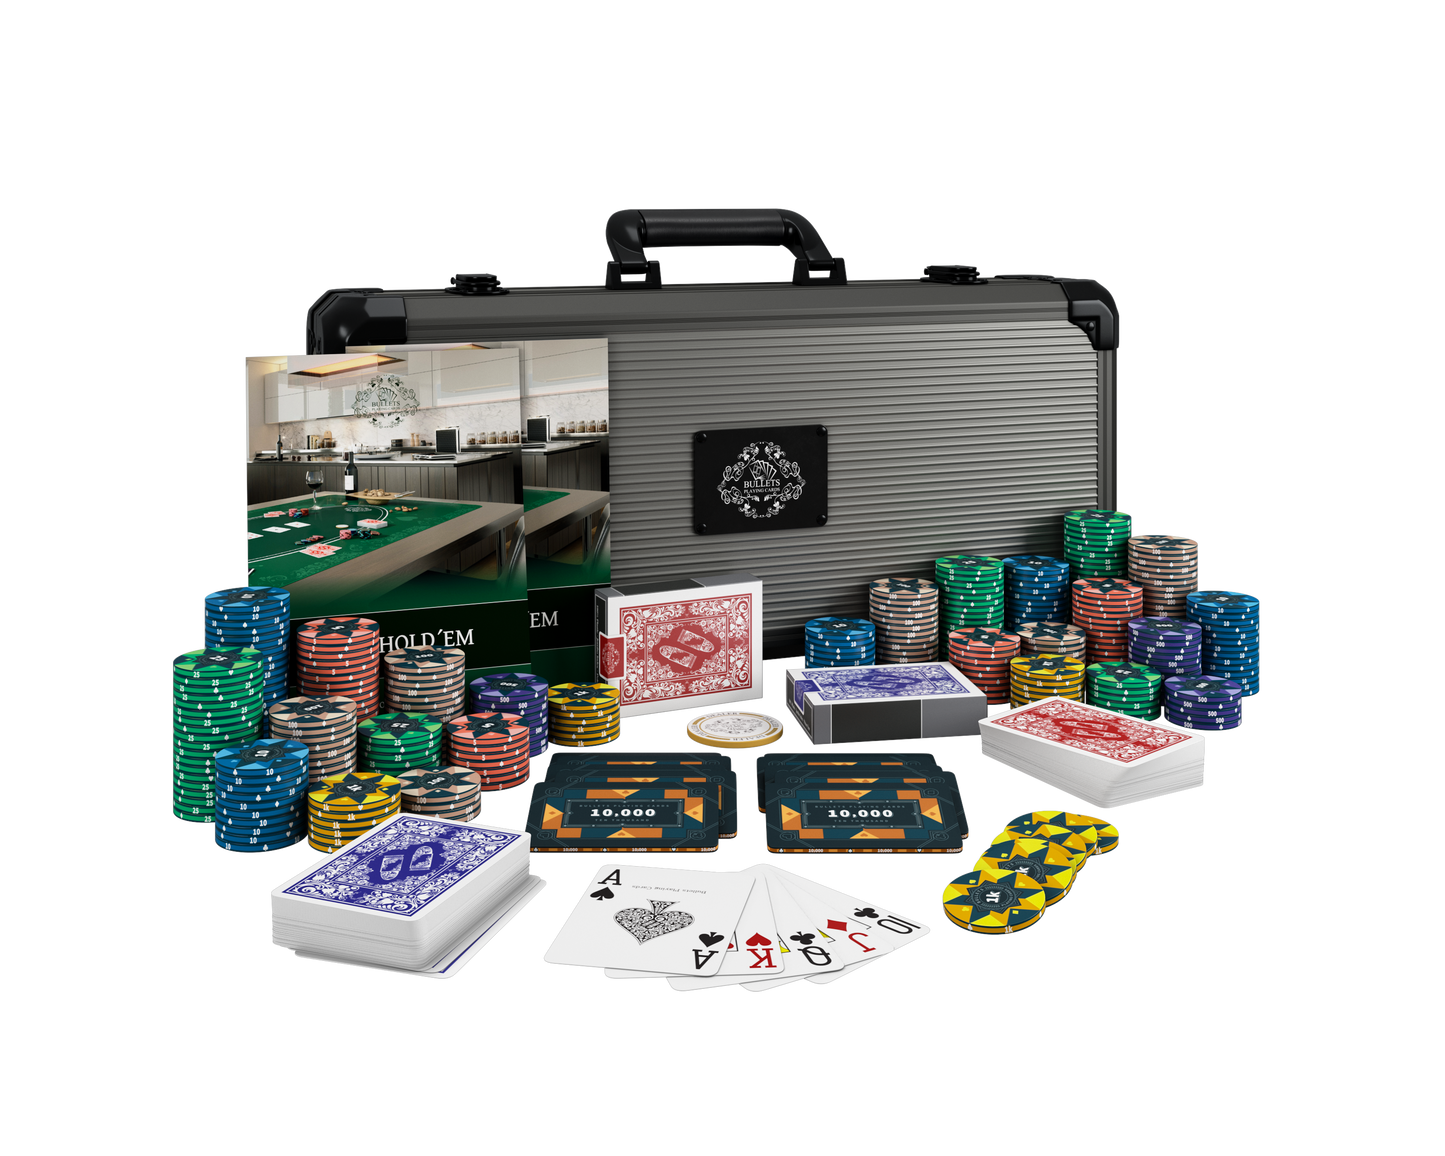 Poker case with 300 ceramic poker chips "Paulie" with values